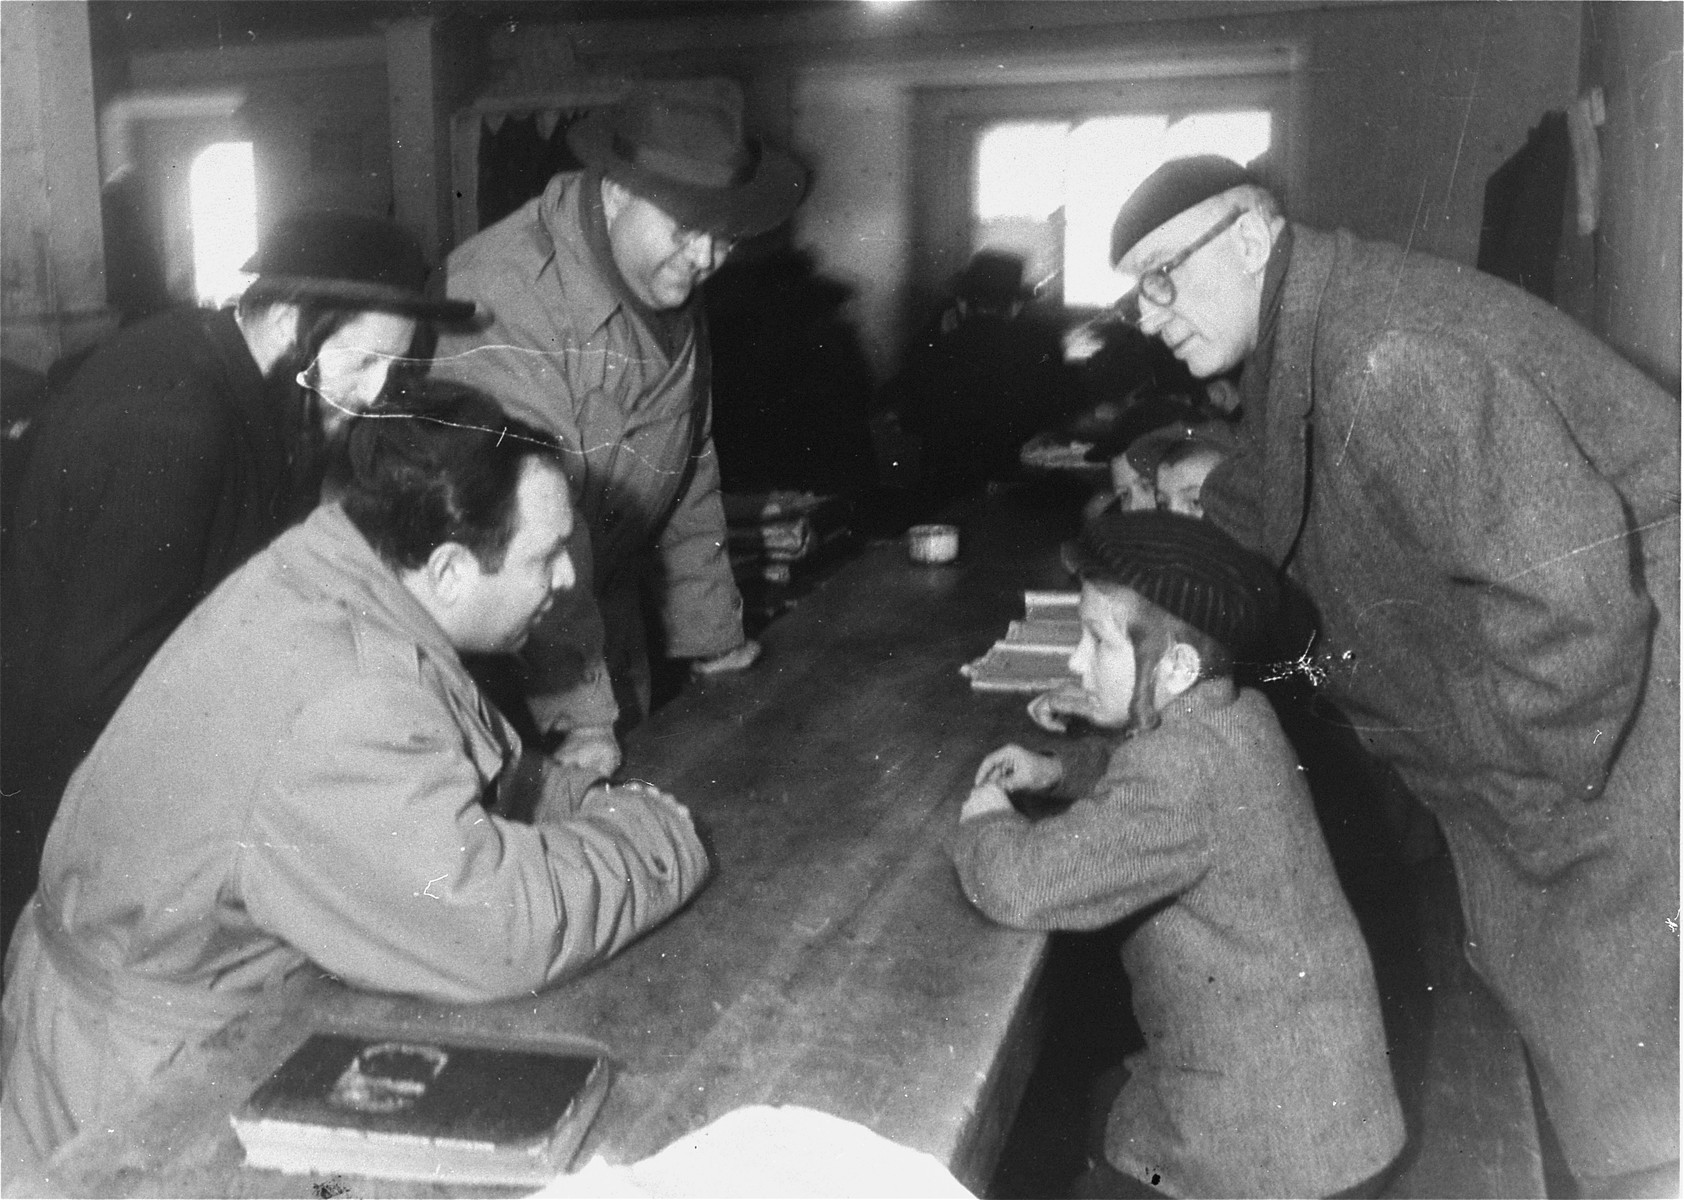 Saul Sorrin (left, foreground), director of UNRRA in the Munich area, visits a heder (religious primary school) at the Foehrenwald DP camp camp in the company of Frank  Kingdon (right), American journalist and politician, and Ted Feder (left), assistant director of the JDC in Germany.